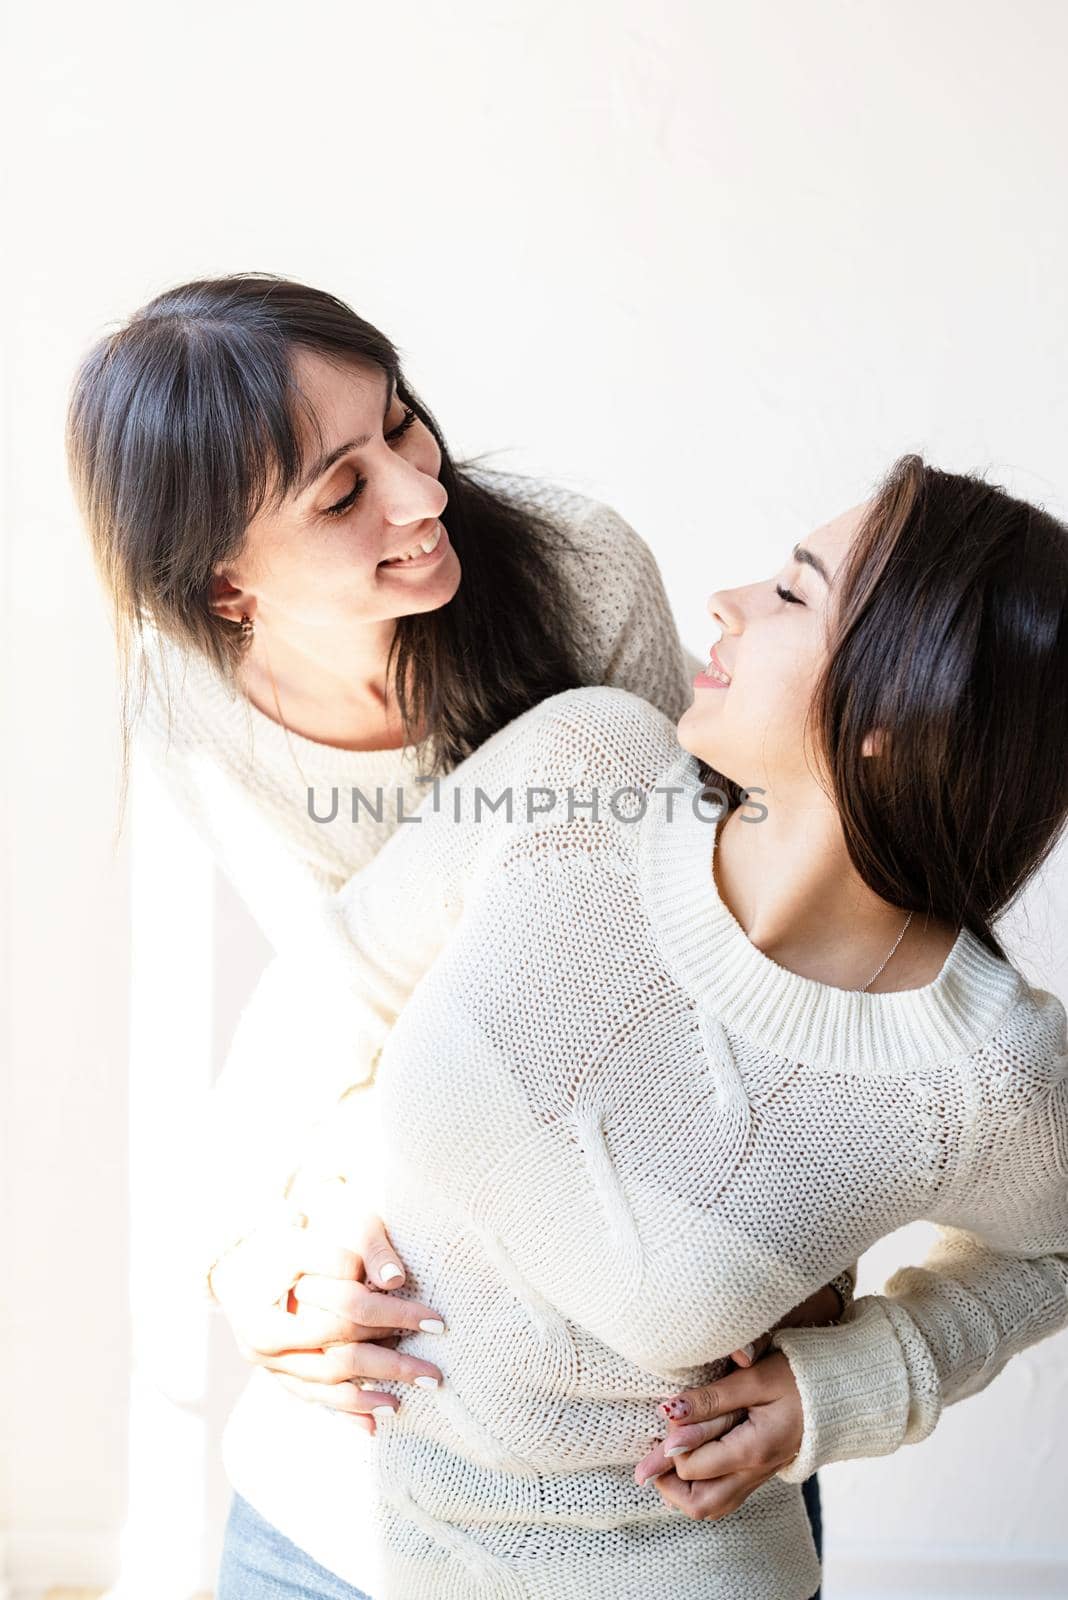 Two female best friends embracing each other by Desperada